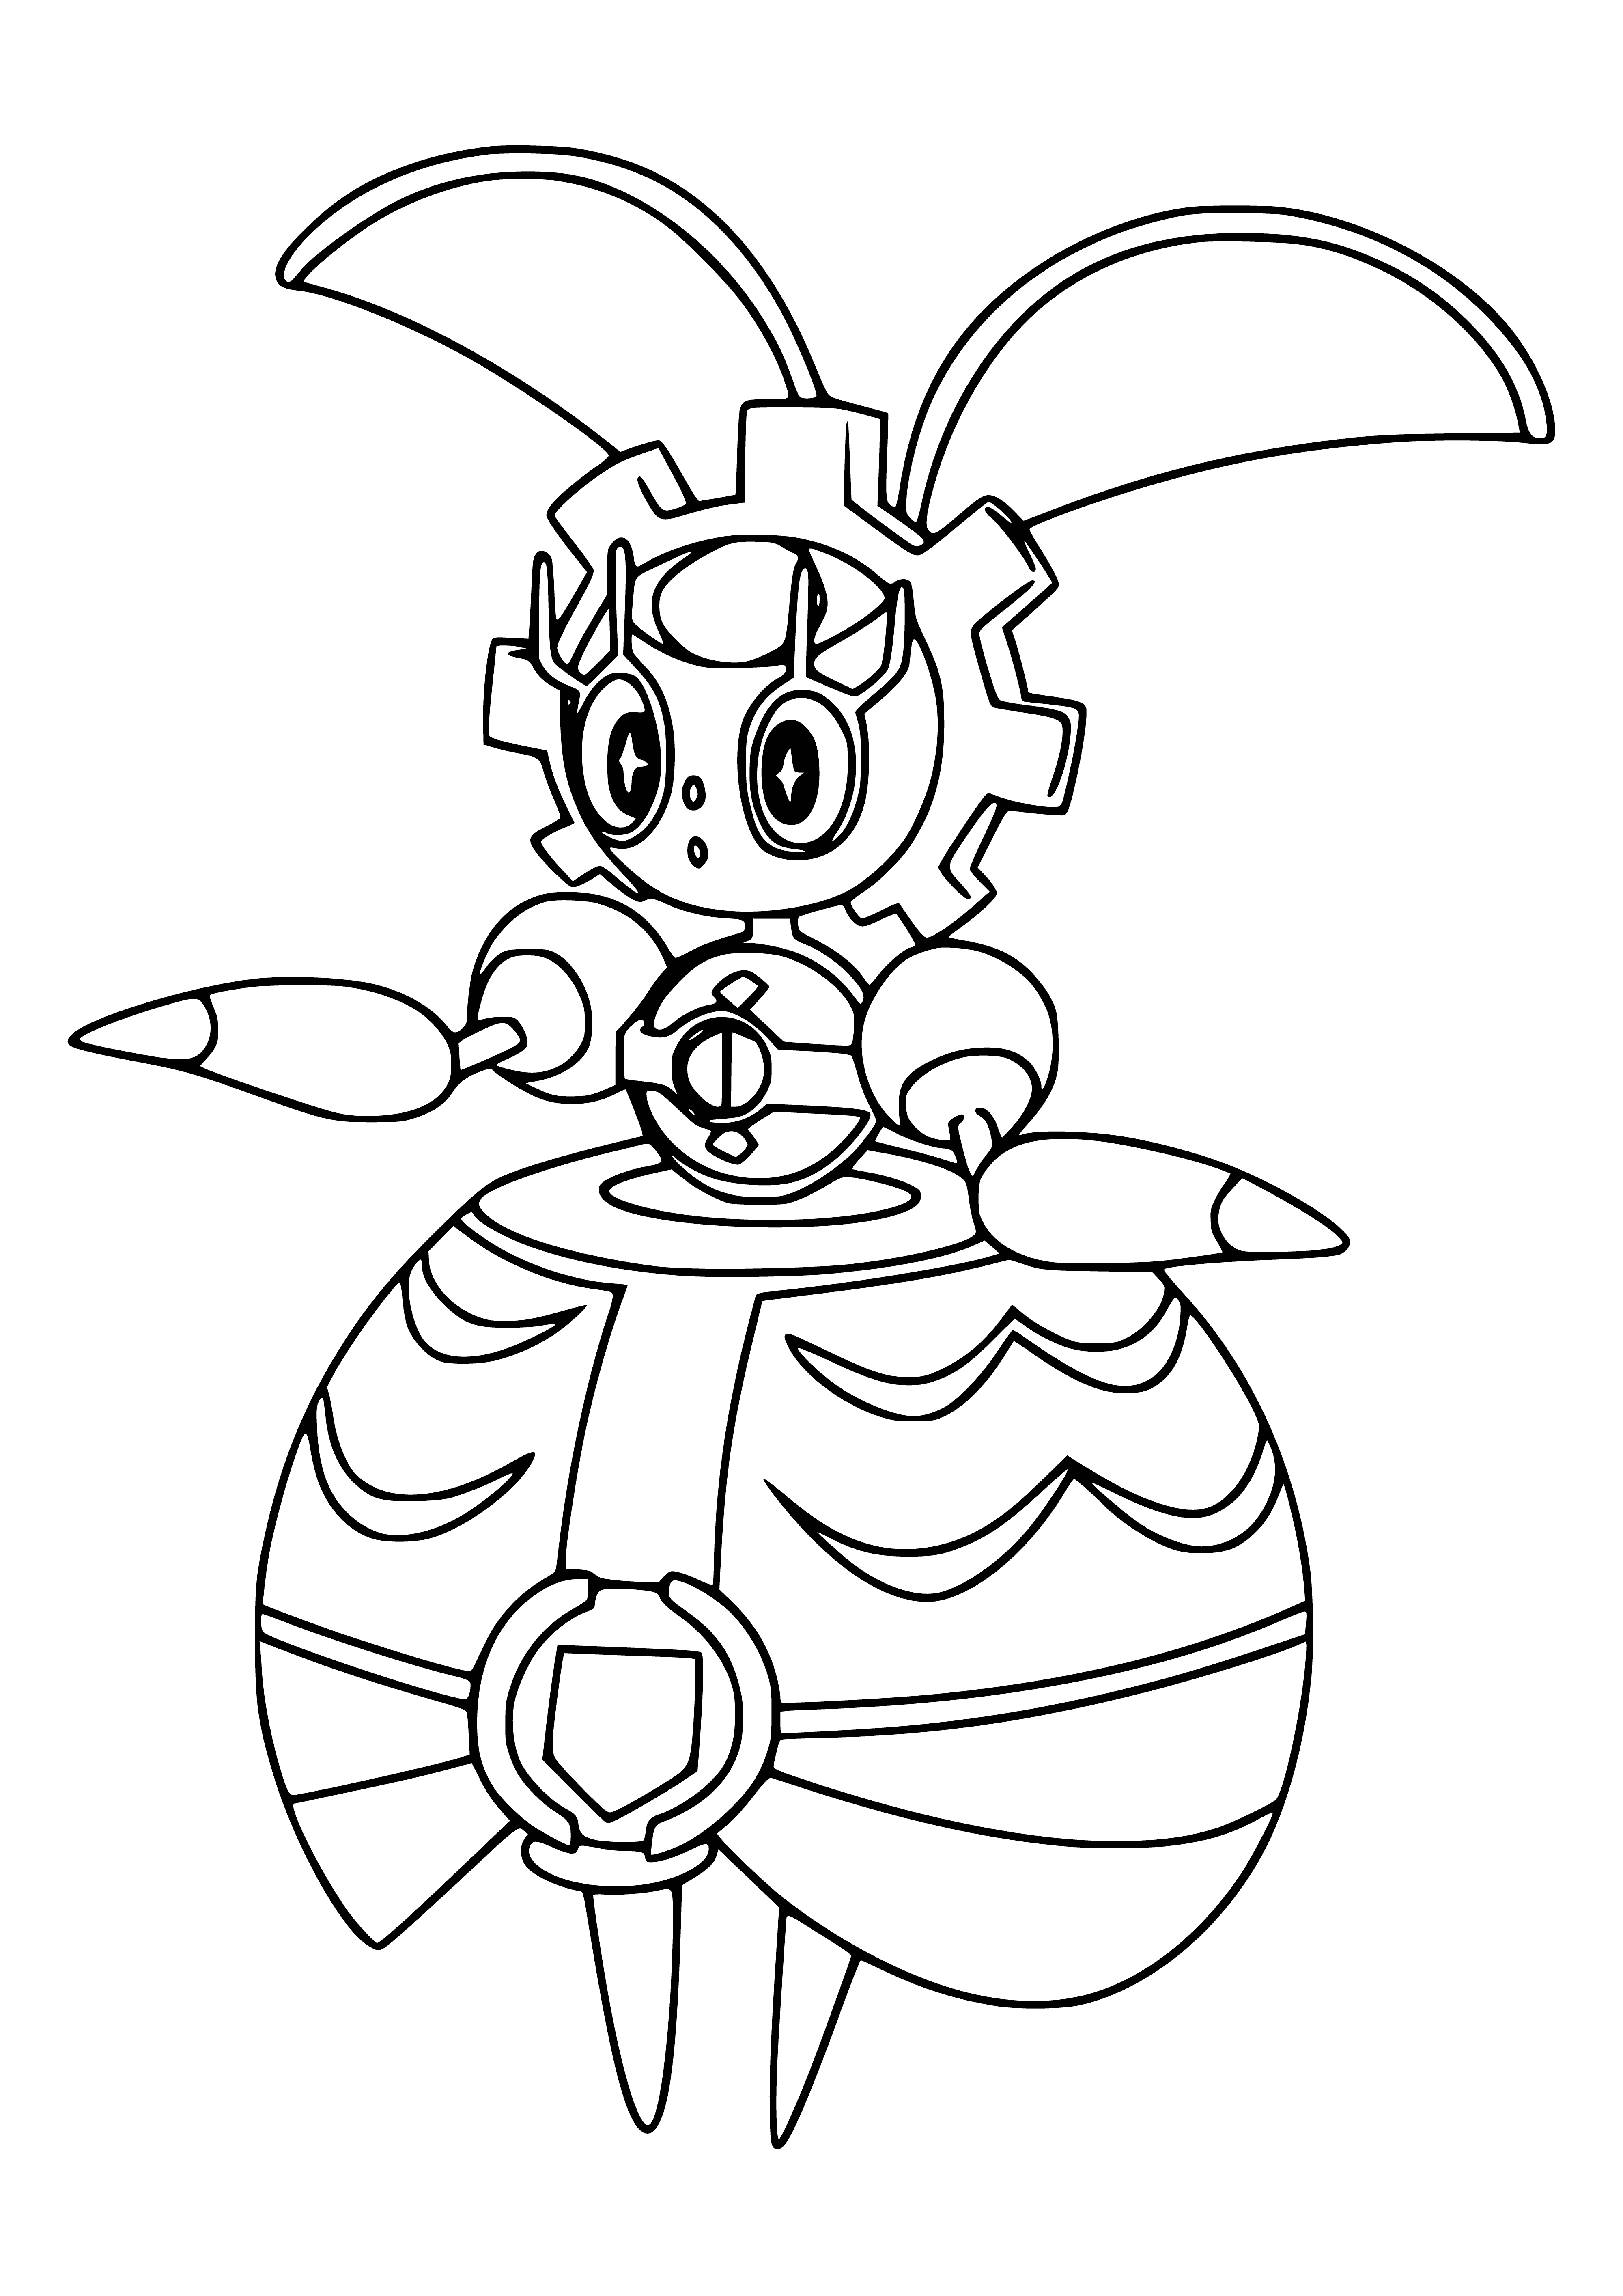 coloring page: Legendary robotic Pokémon Magearna has reddish-pink body, white head, yellow horns, violet eyes, and wings on its back. It has a violet gem on its front.